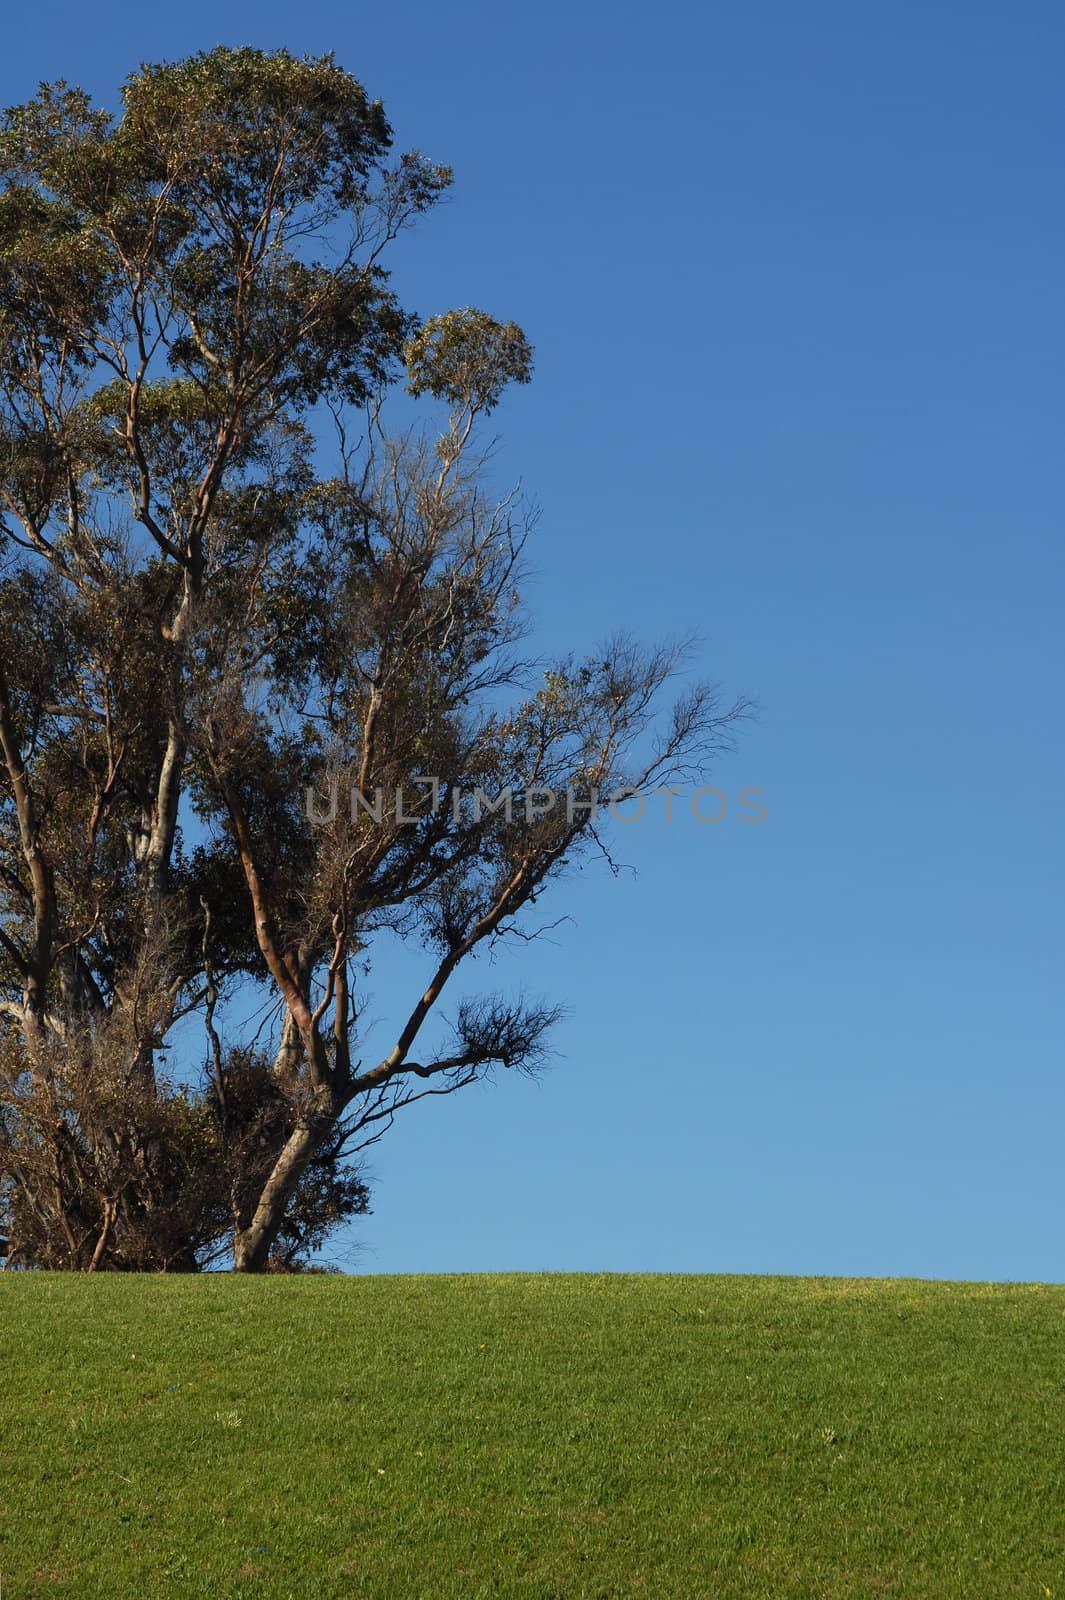 Single tree and green grass on blue sky background